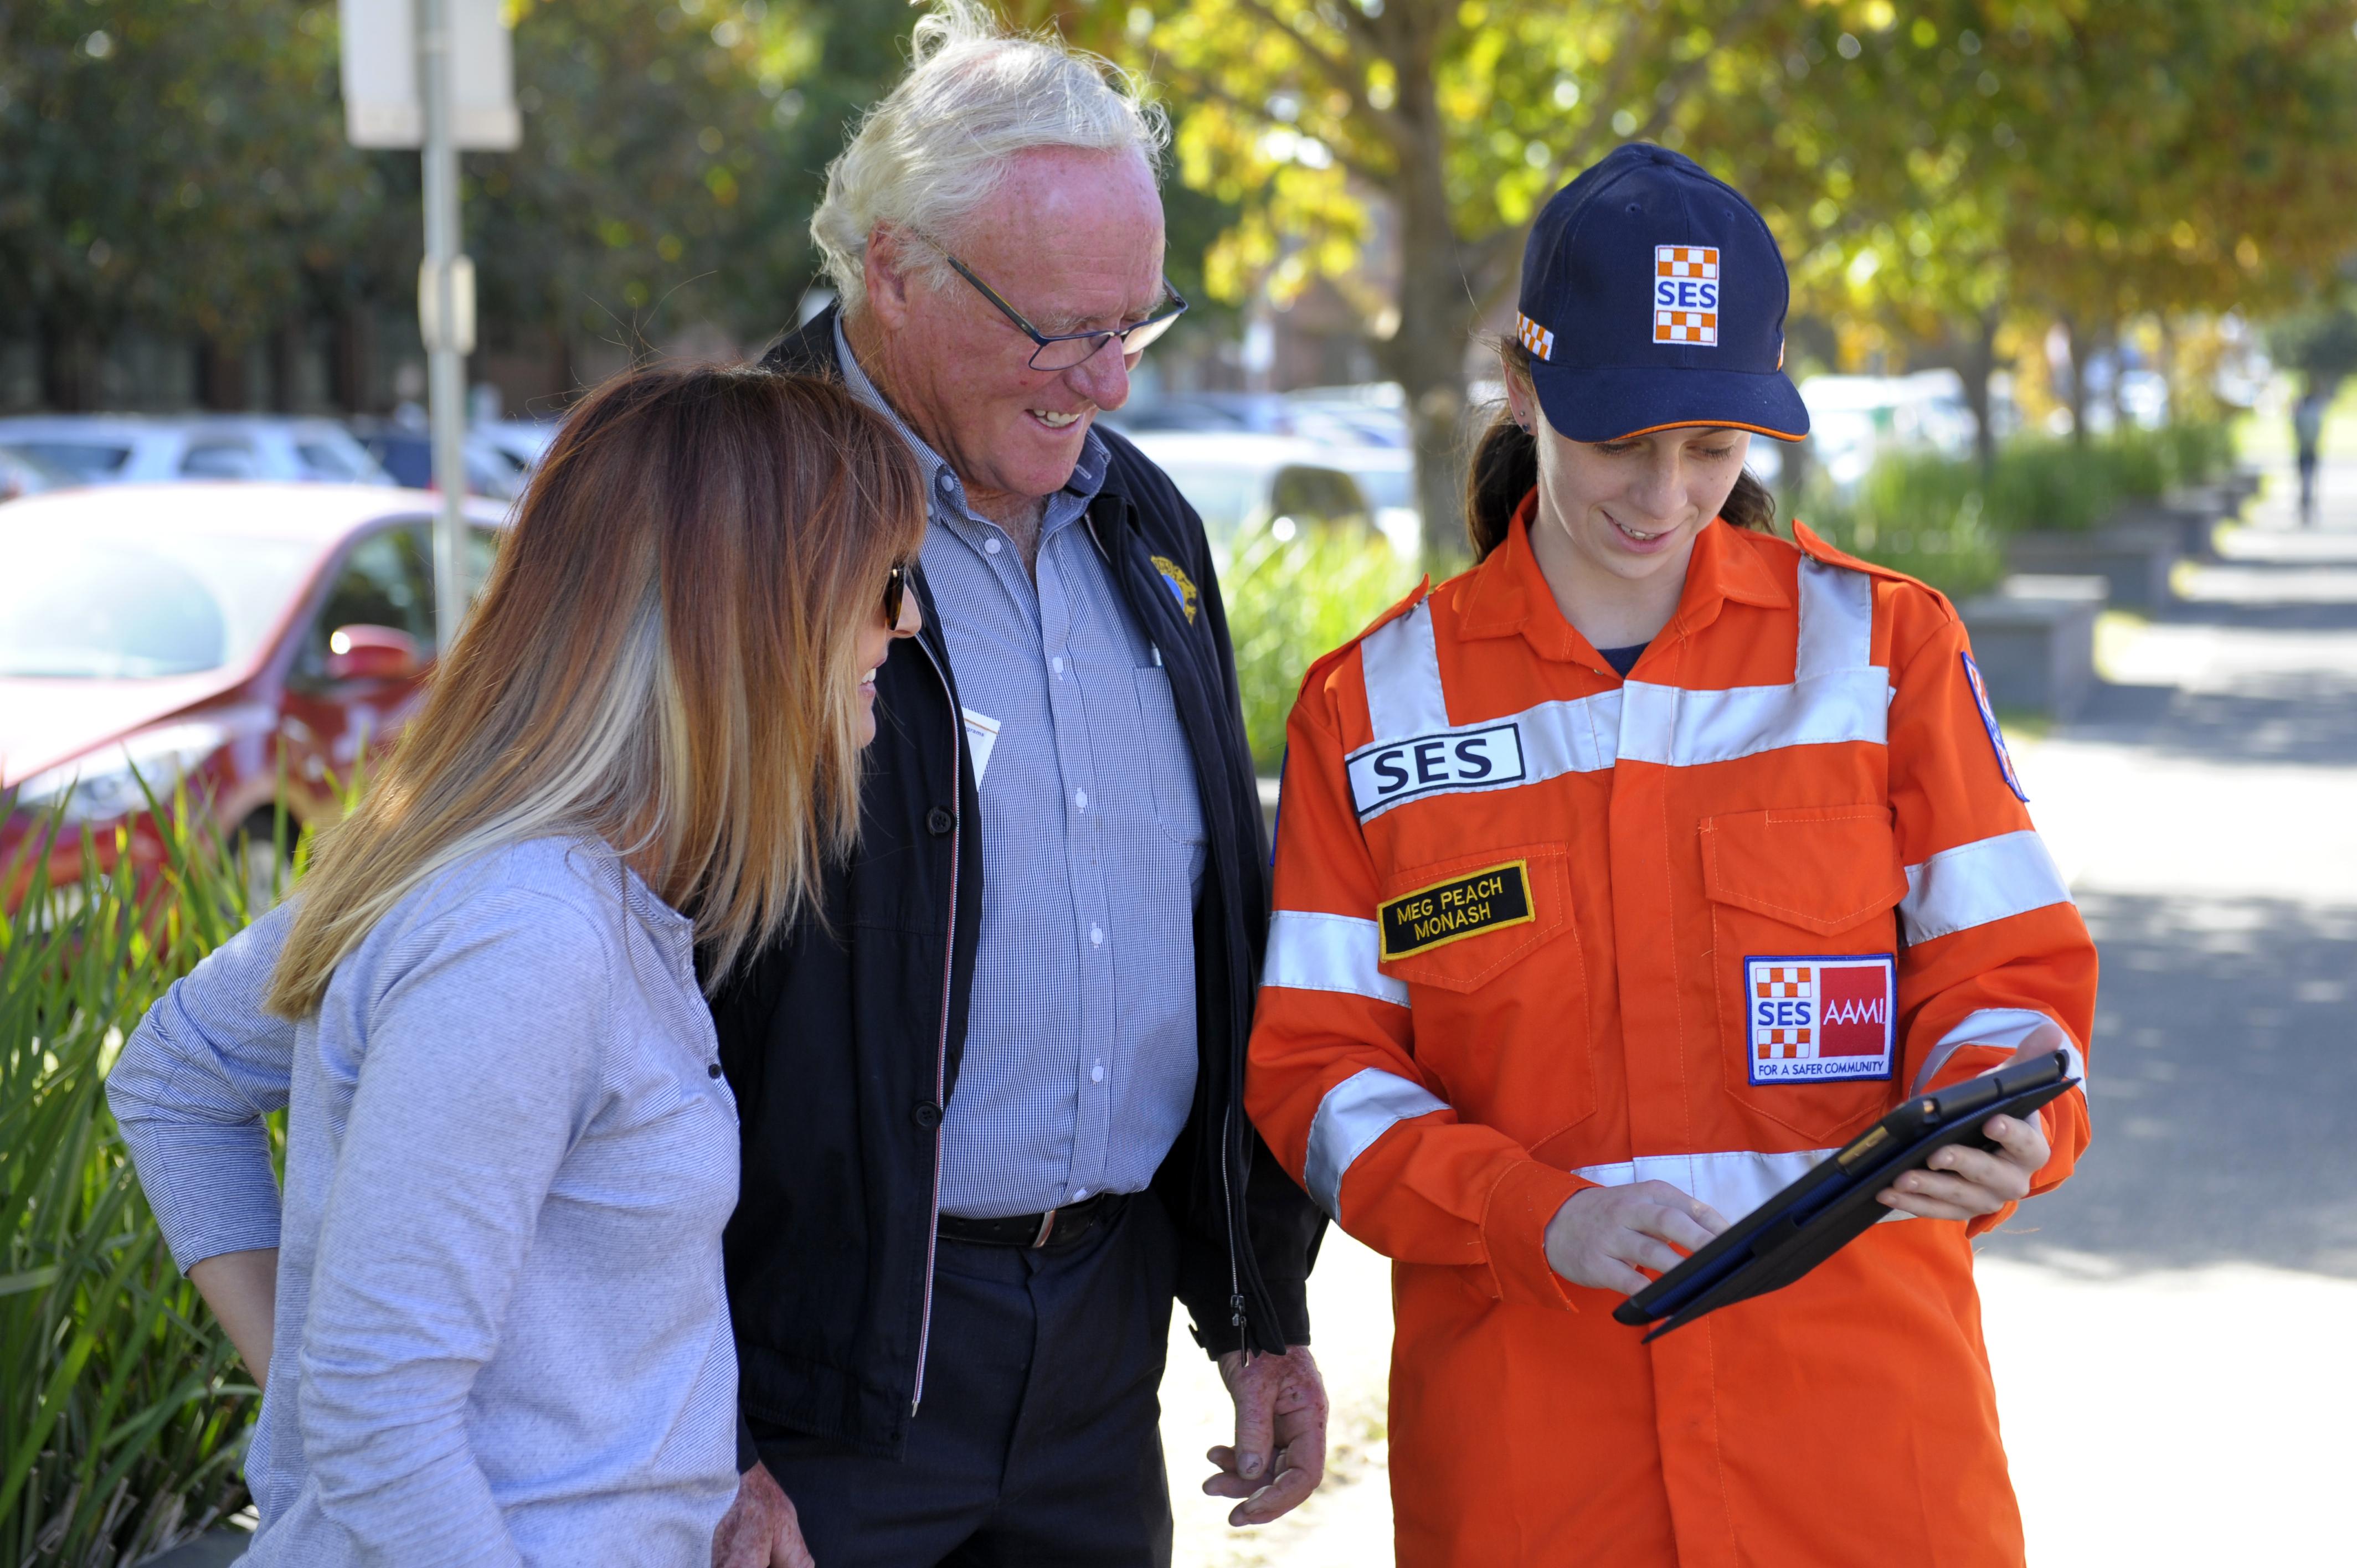 SES engaging with community